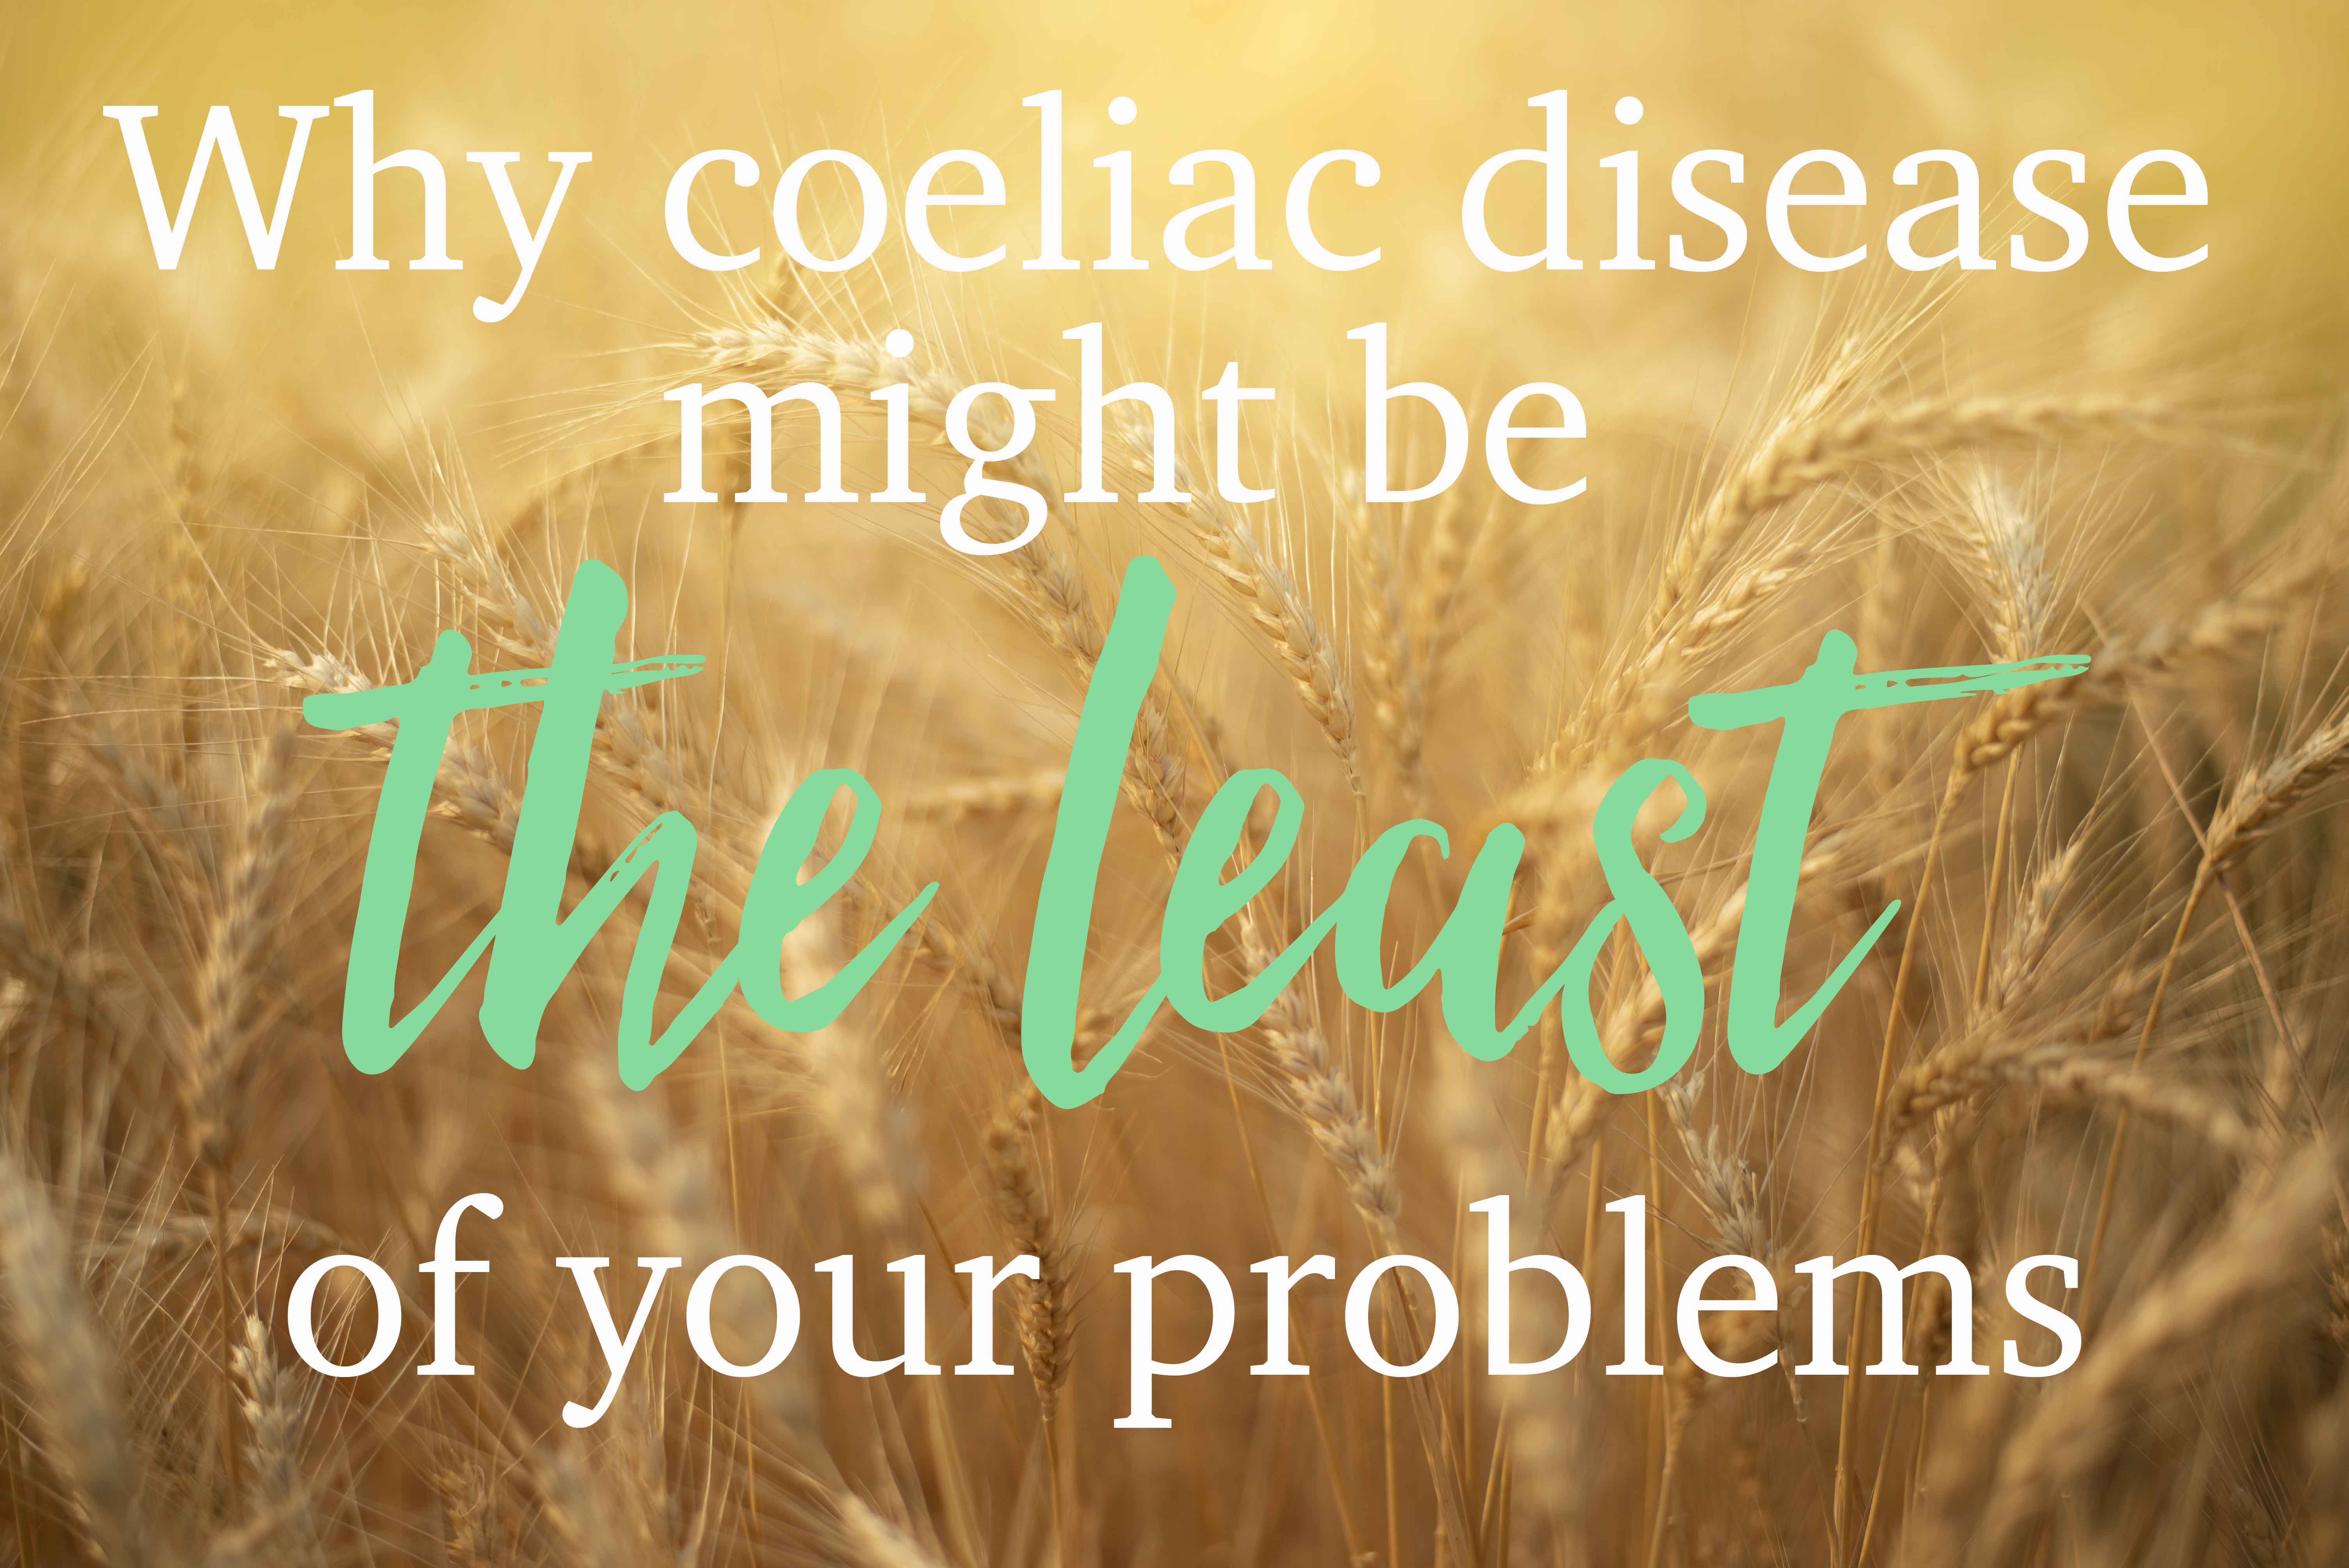 Why coeliac disease might be the least of your problems